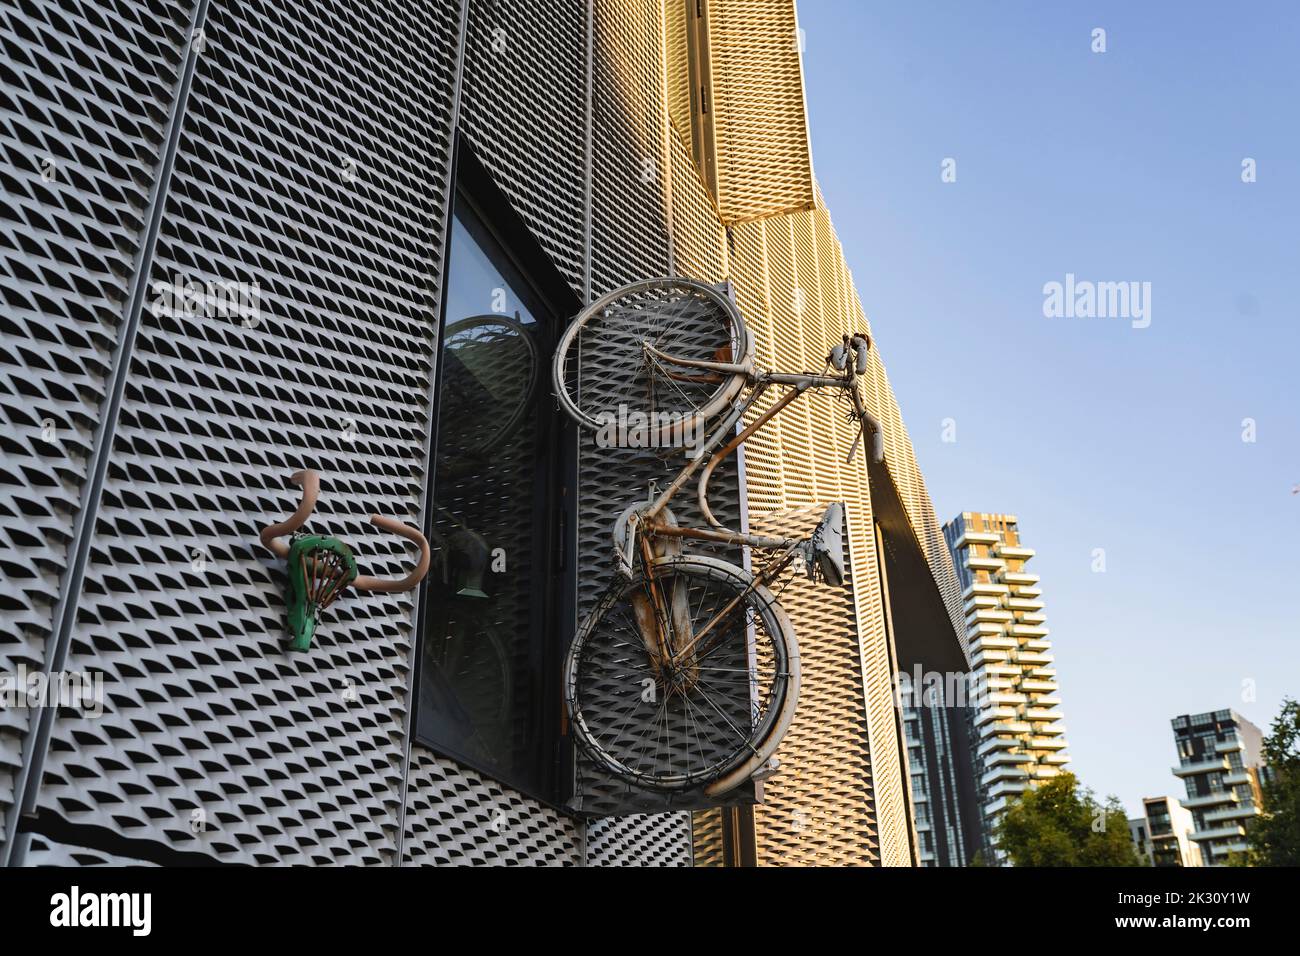 Old bicycle mounted near window of modern building Stock Photo